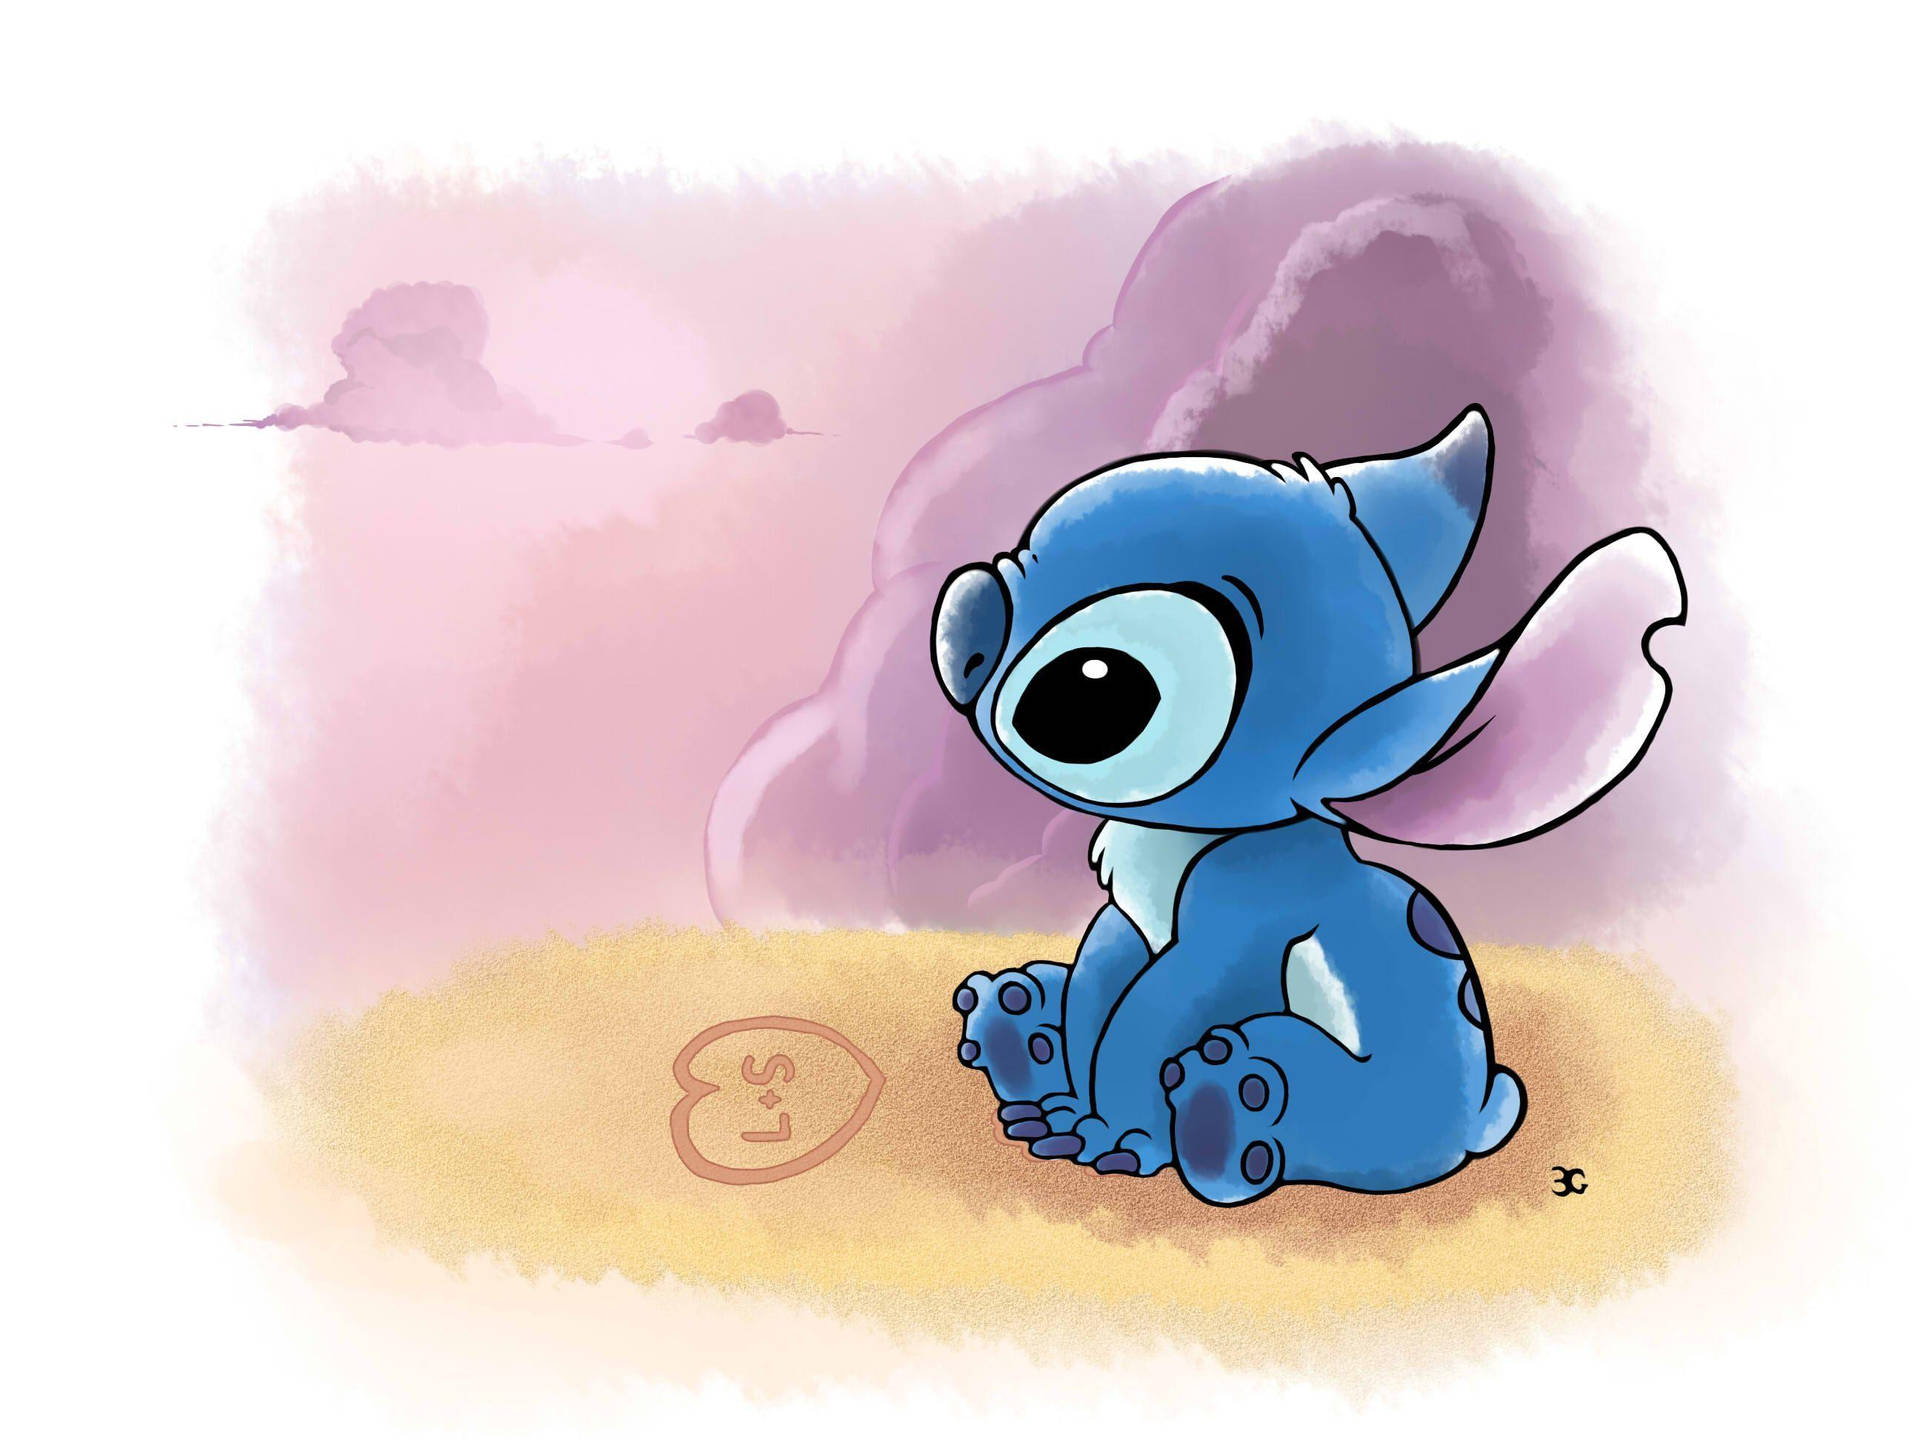 Cute Aesthetic Stitch On A Beach Background